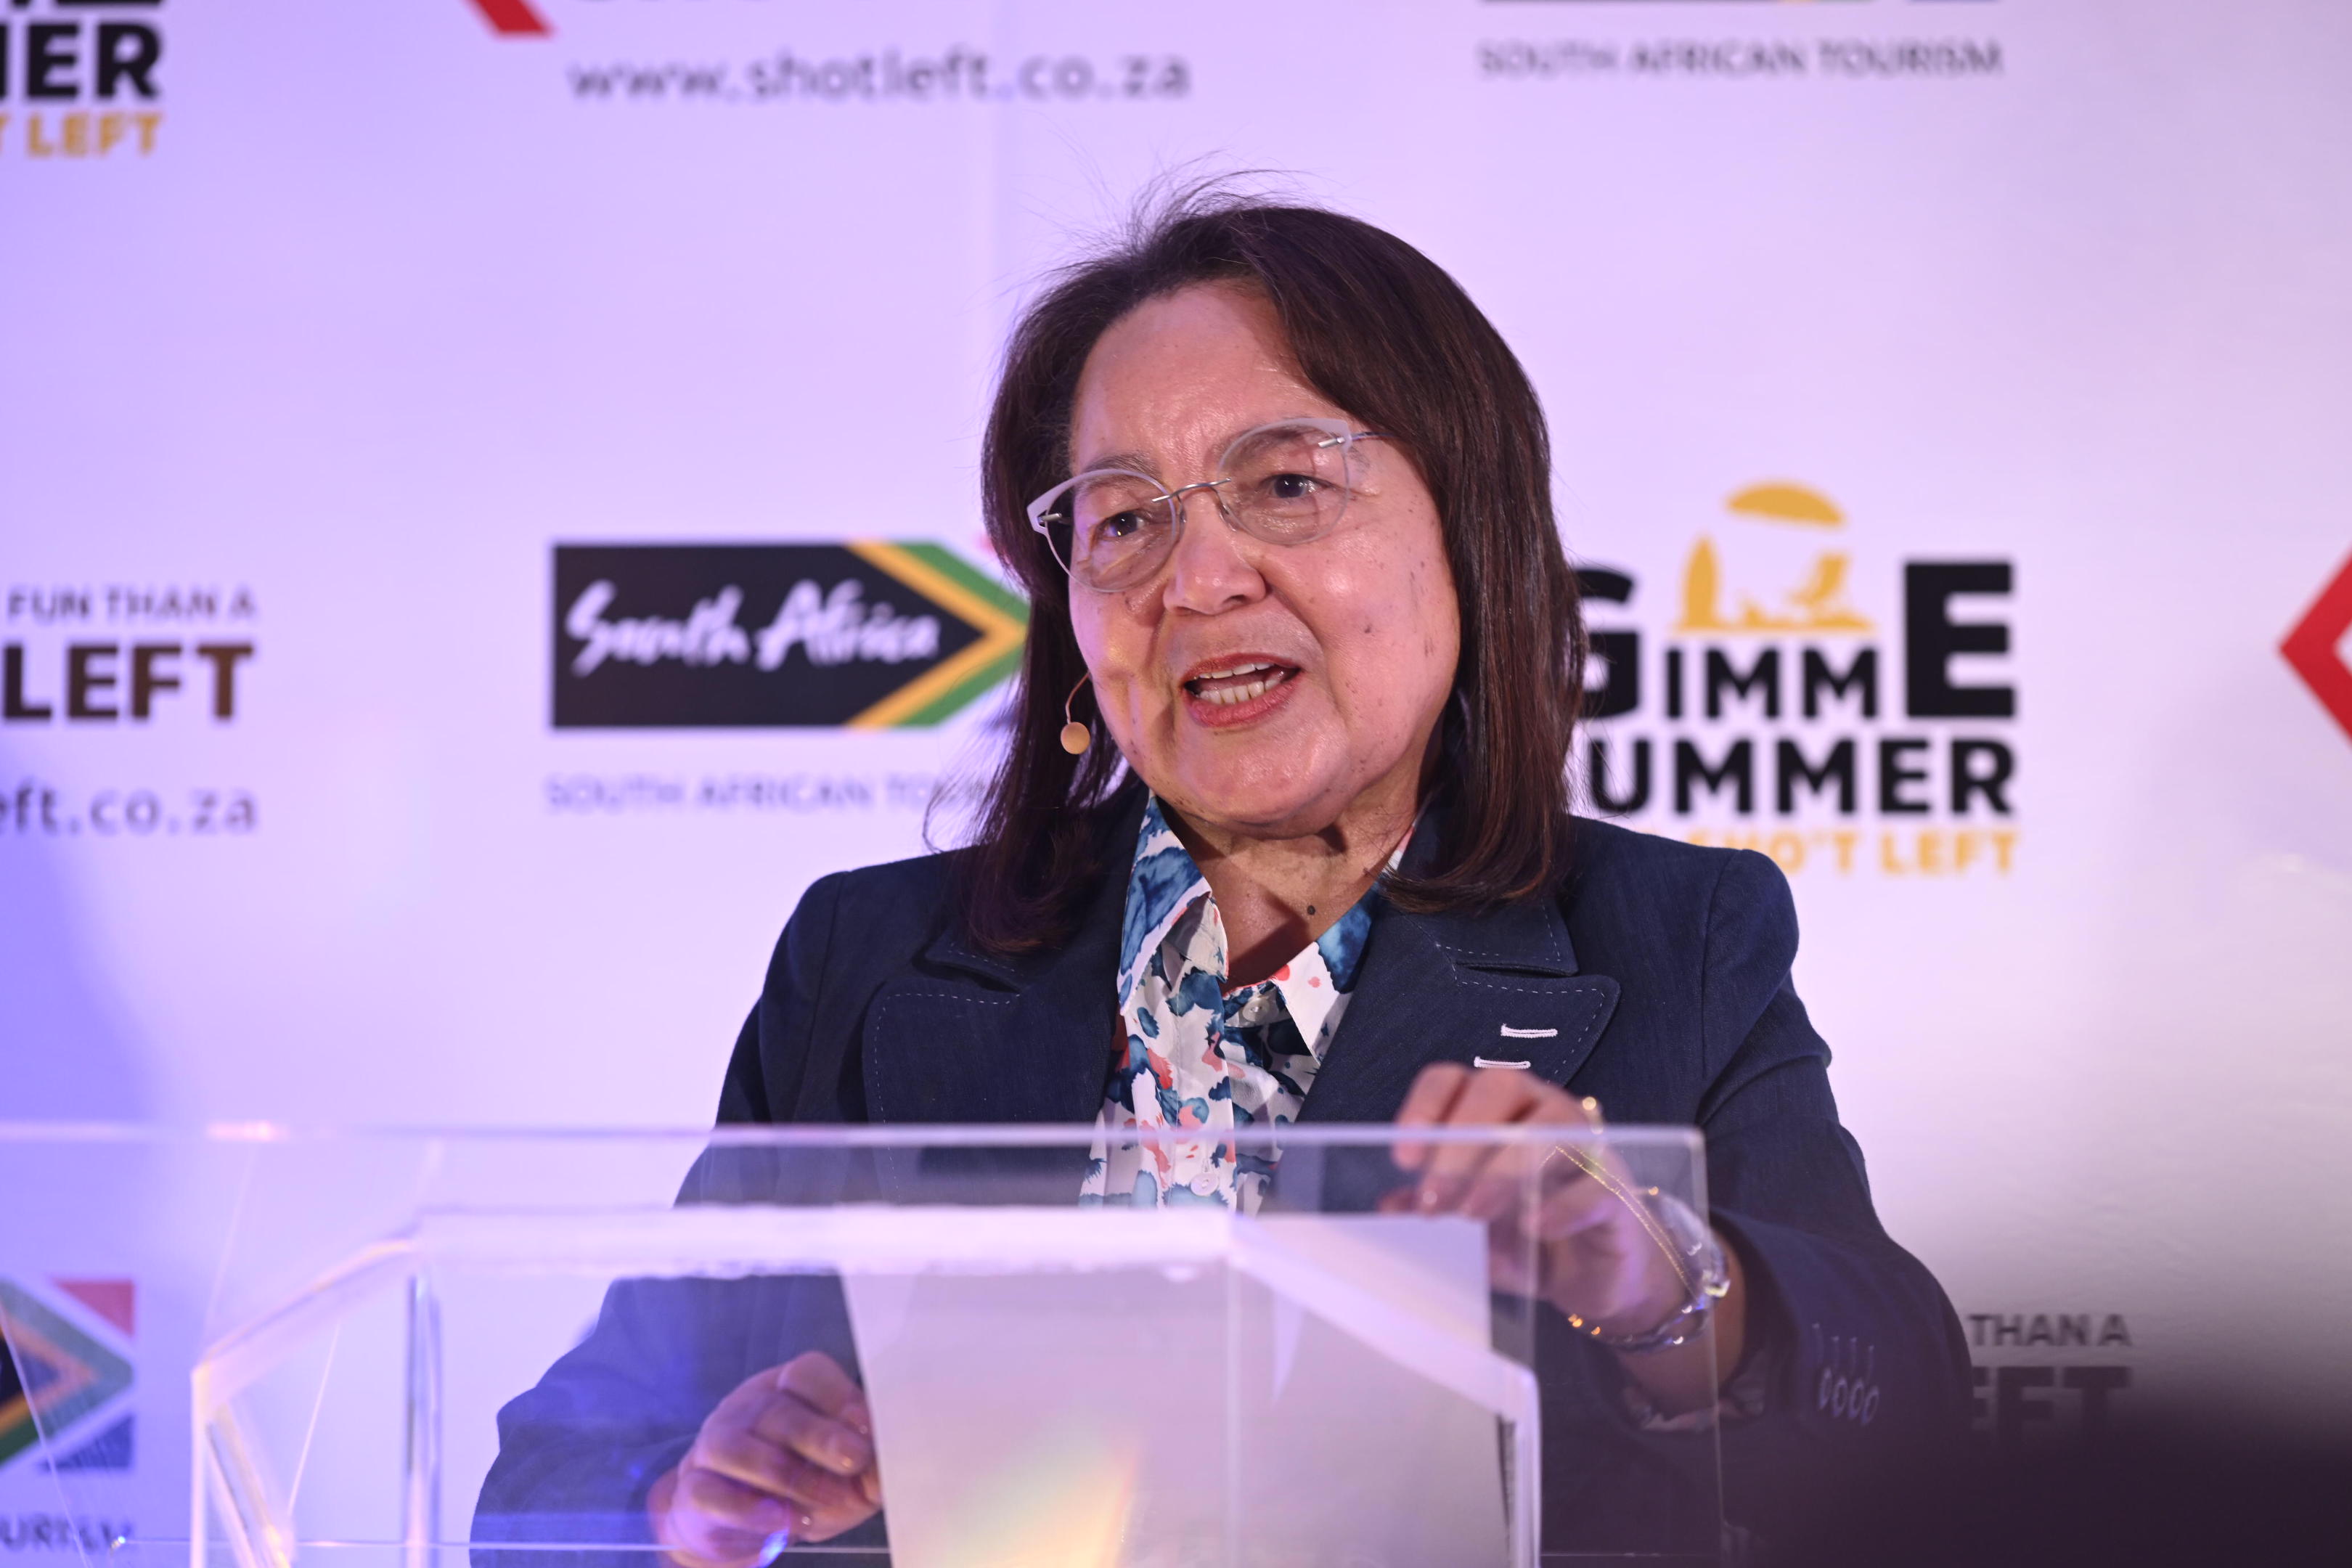 Speech by the Minister of Tourism, Patricia de Lille, delivered on the occasion of the Tourism Summer Campaign launch held in th